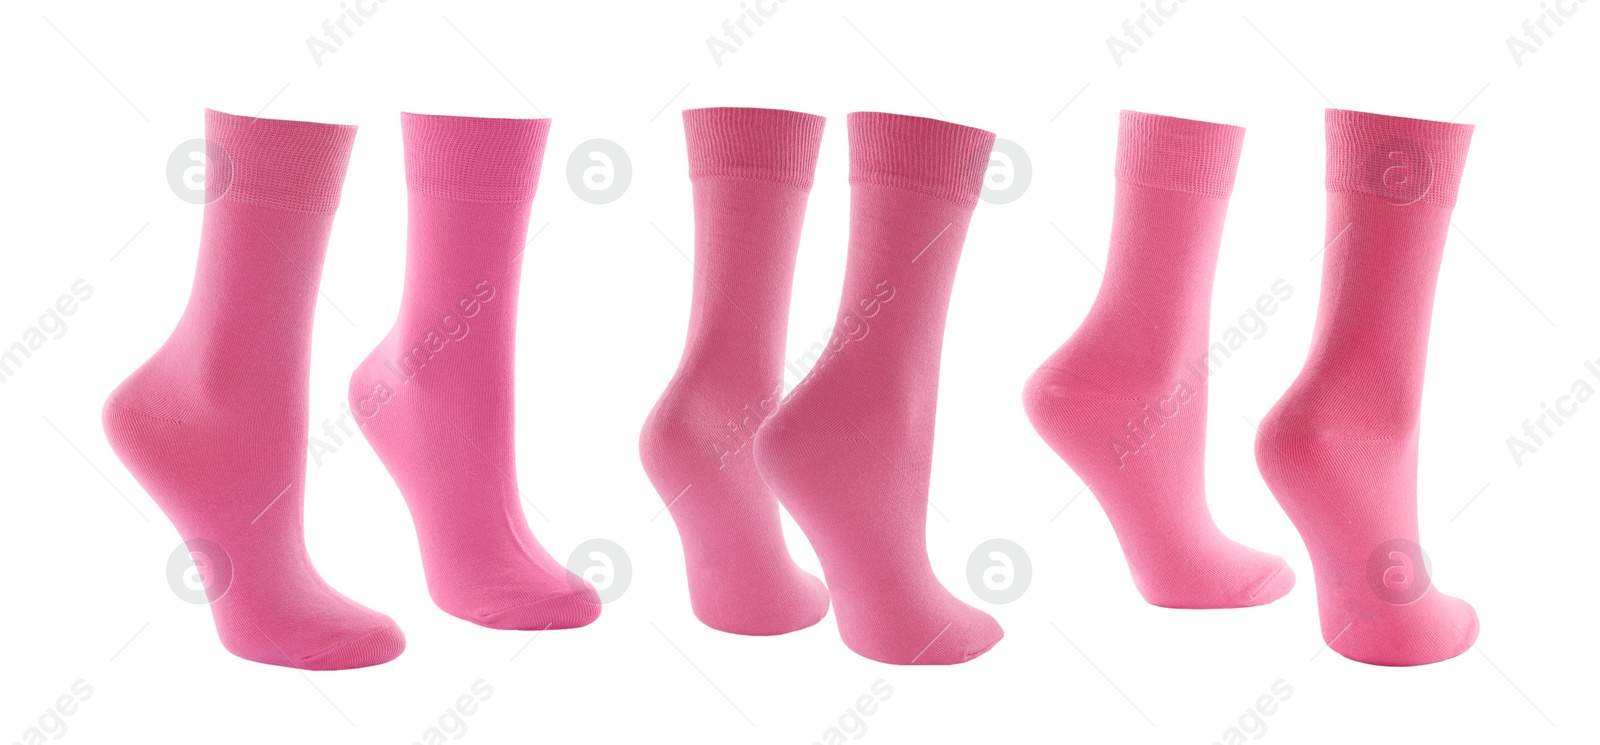 Image of Pairs of pink socks on white background, collage. Banner design